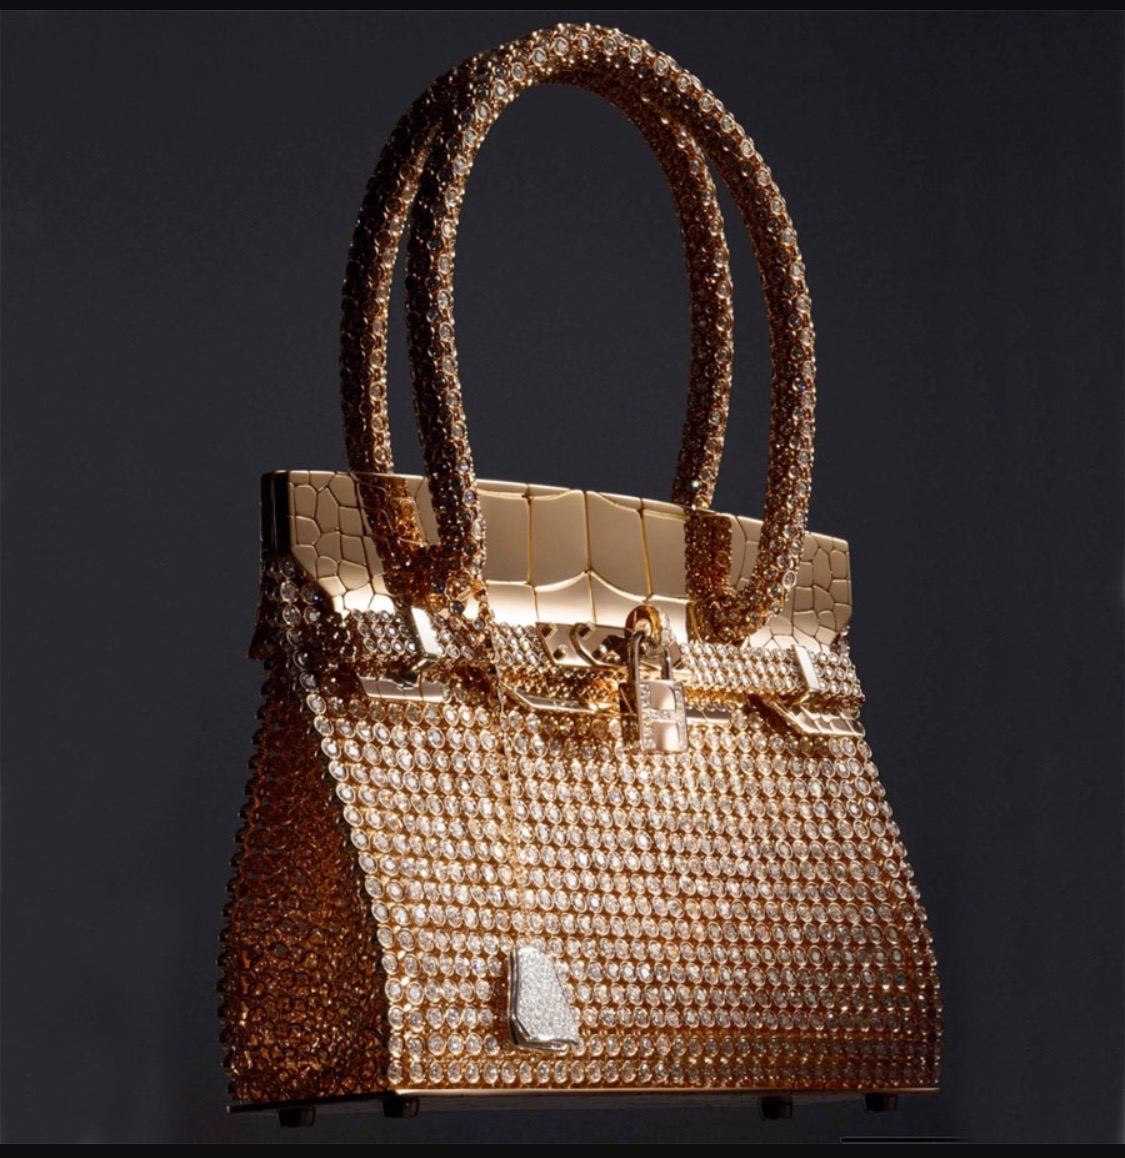 Most Expensive Handbags in 